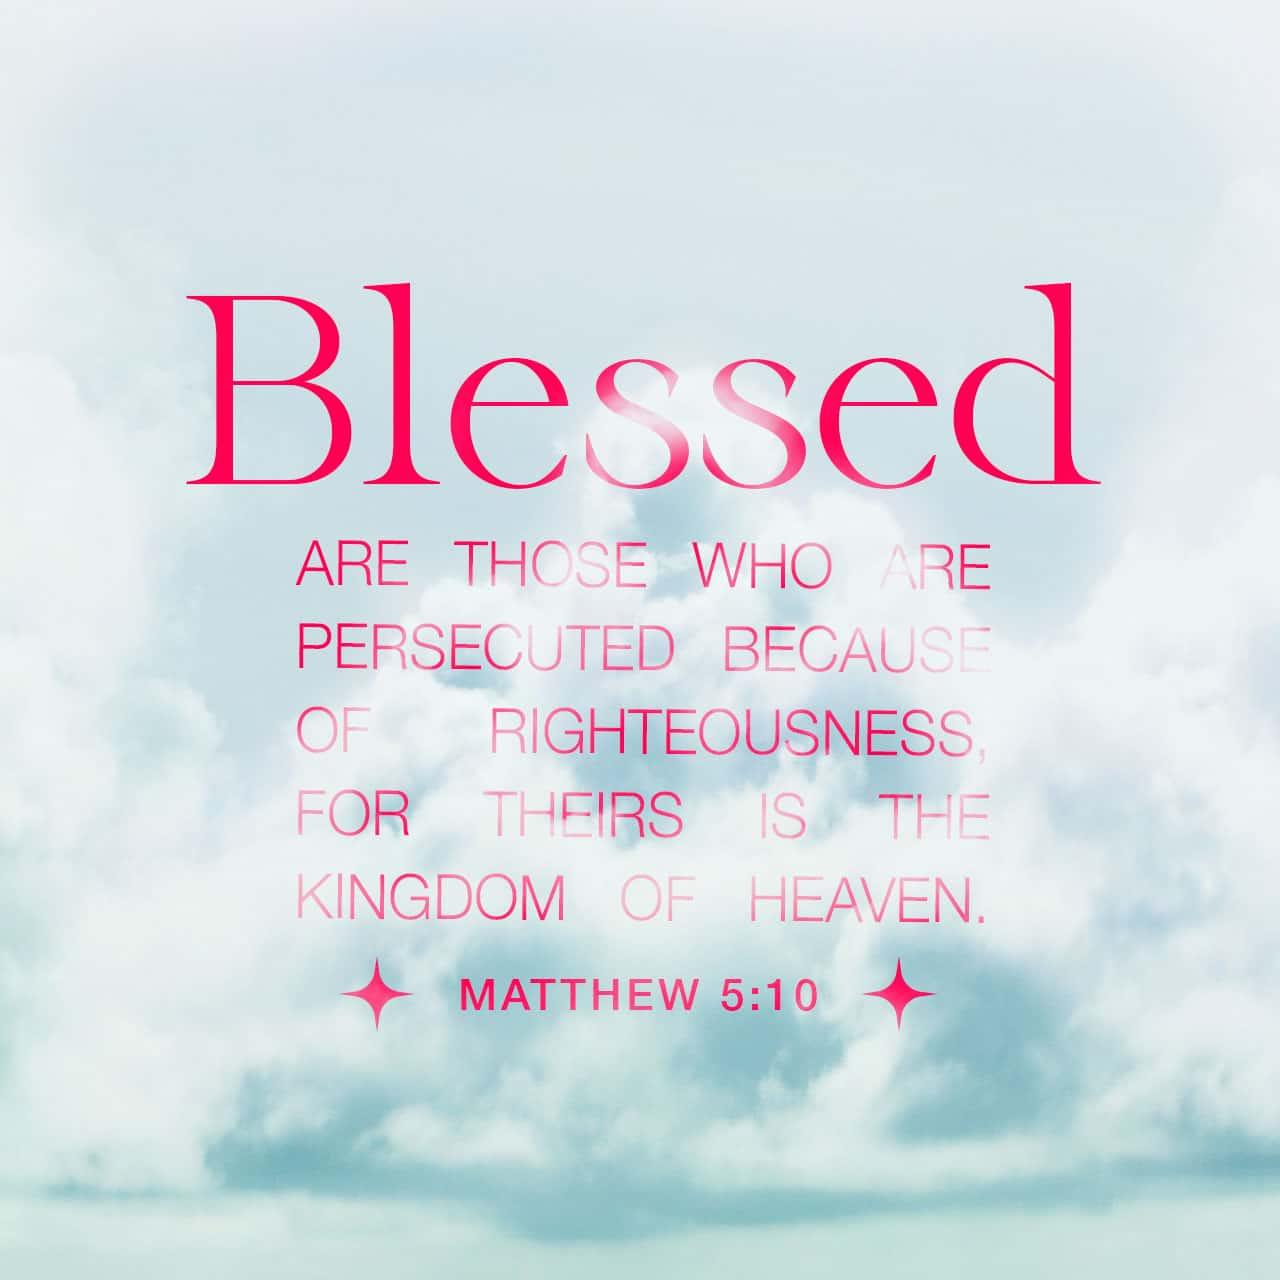 Bible Verse of the Day - day 84 - image 68517 (Matthew 5:10)